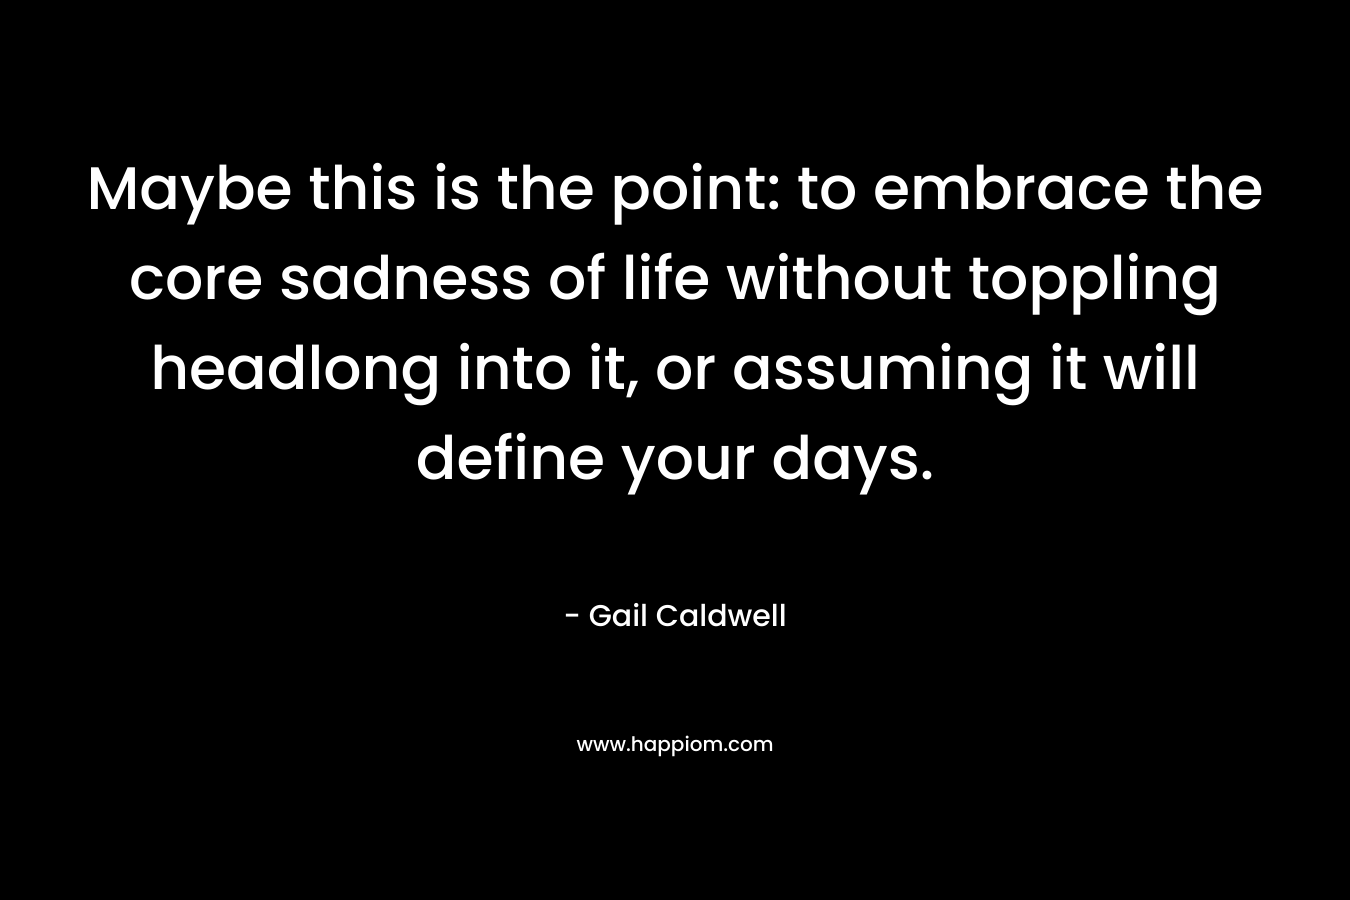 Maybe this is the point: to embrace the core sadness of life without toppling headlong into it, or assuming it will define your days. – Gail Caldwell